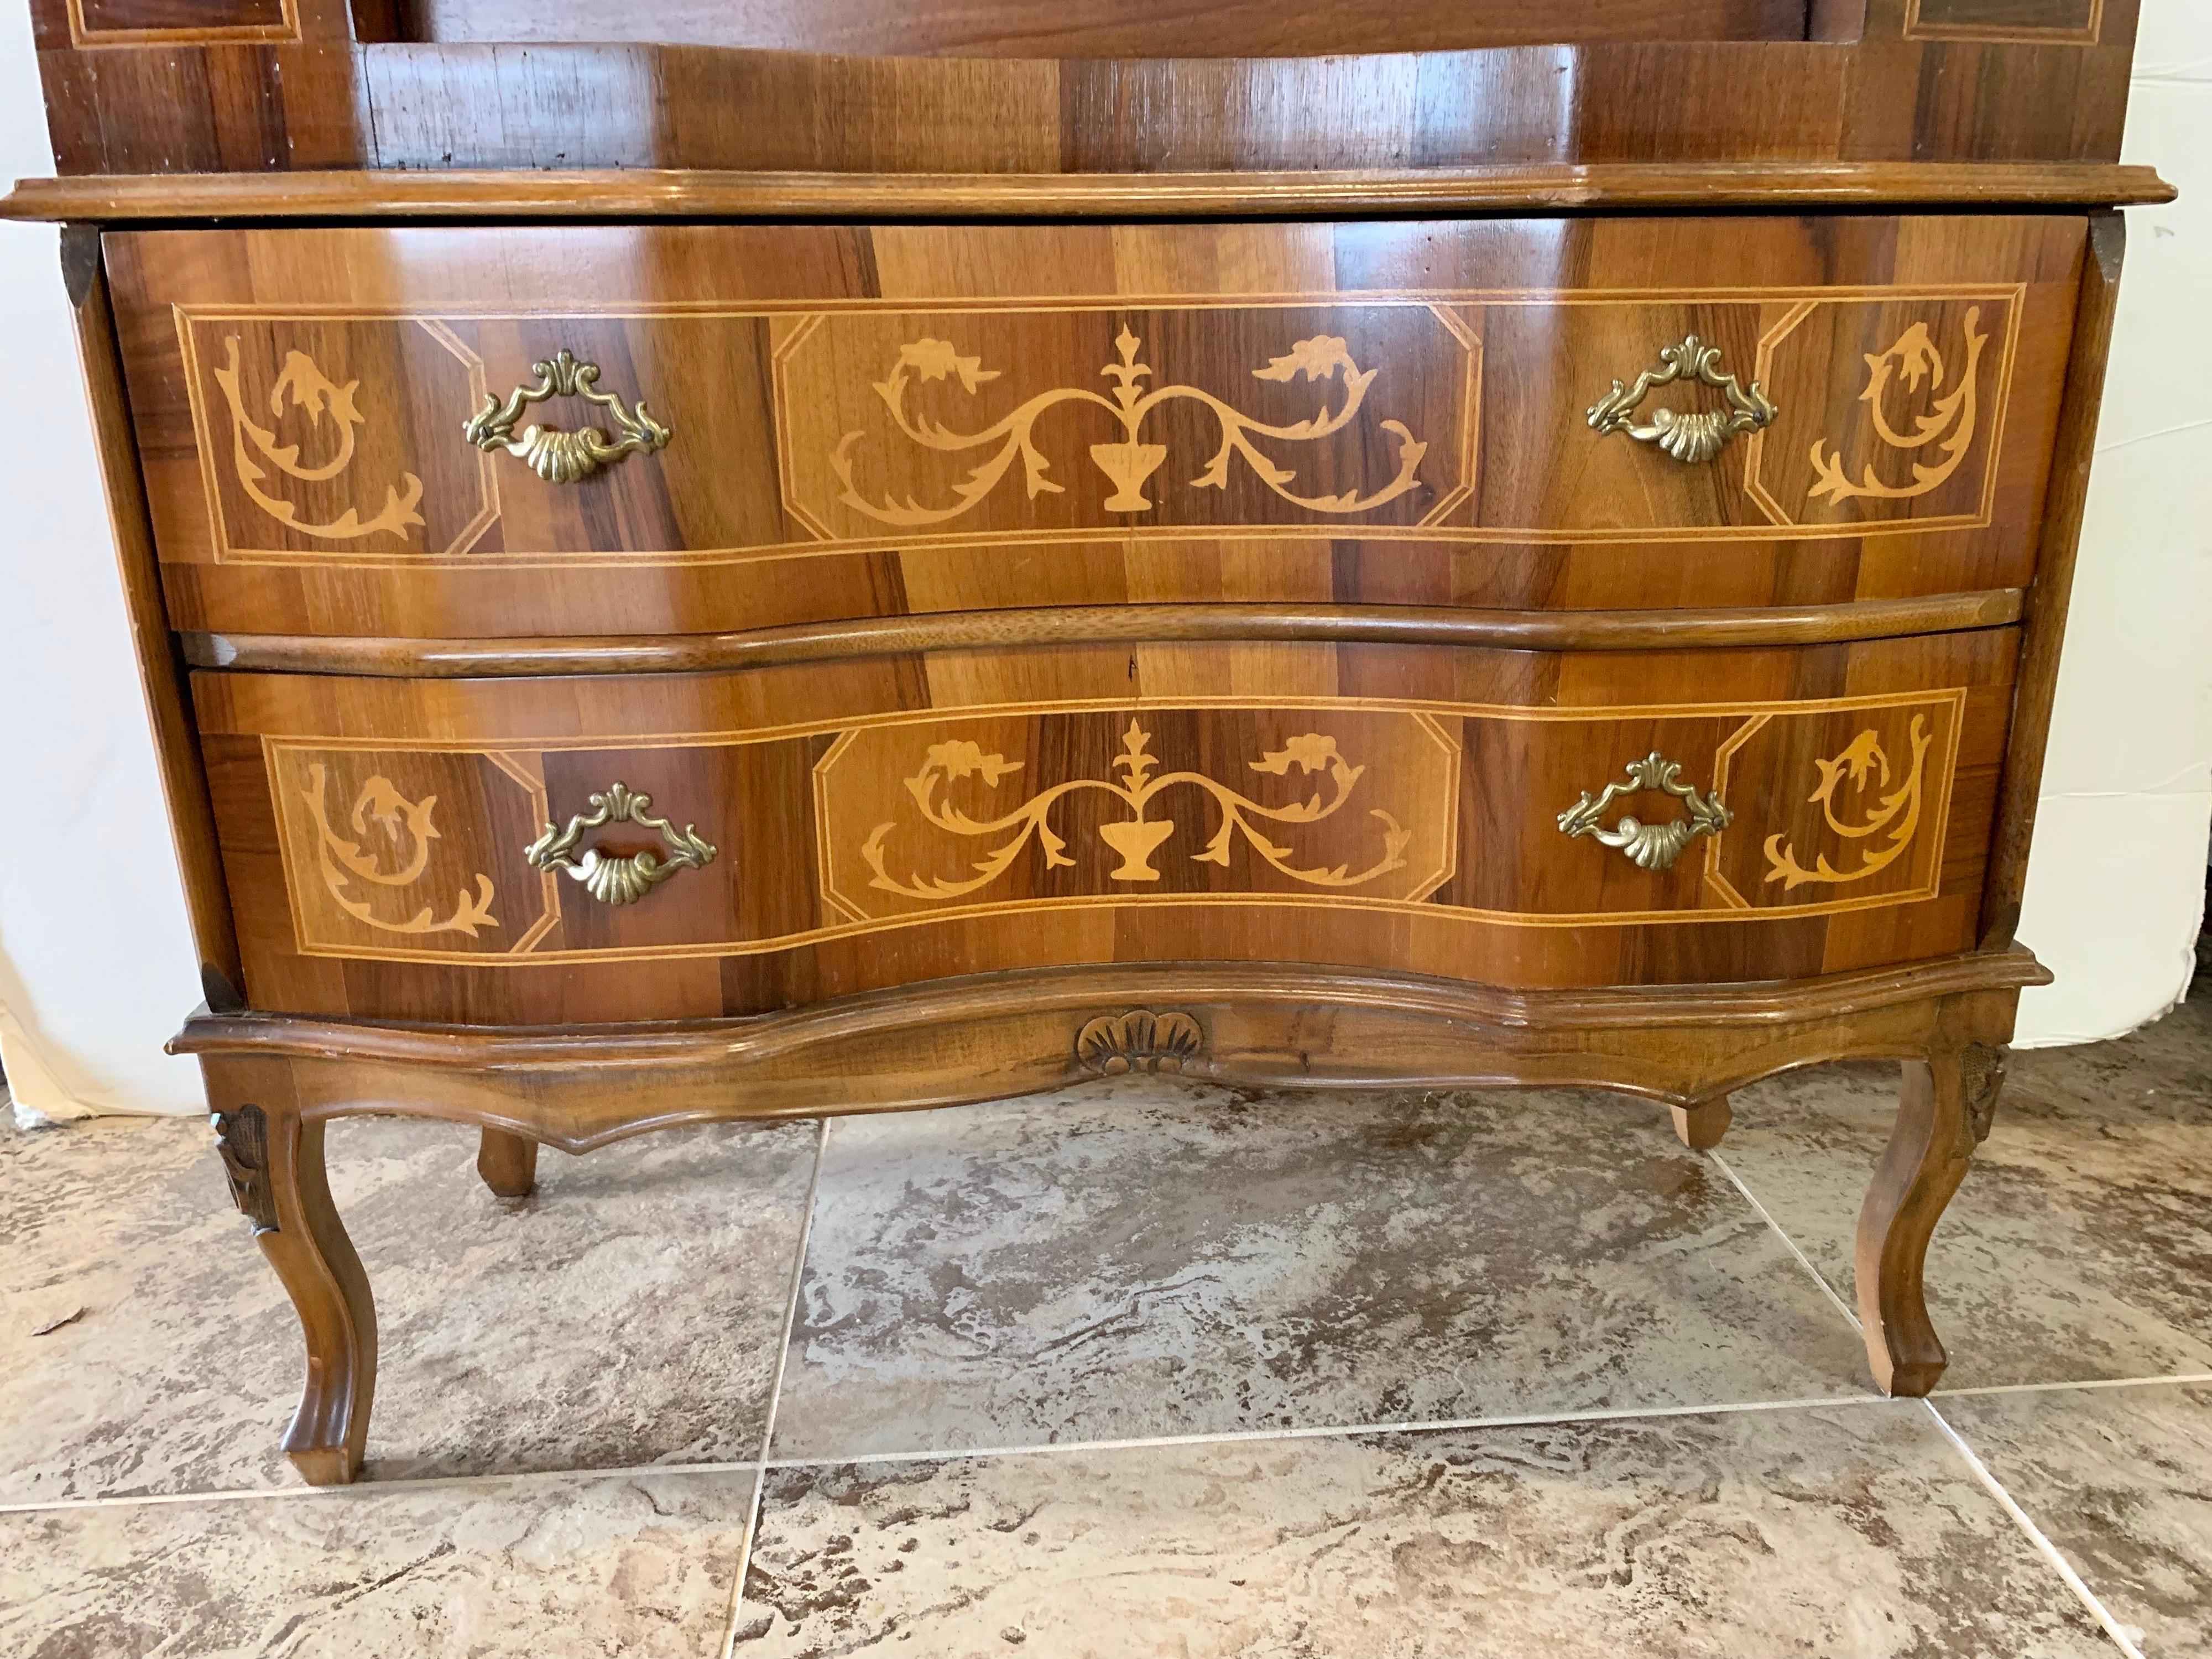 Exquisite French Louis XVI style small secretary desk that features marquetry and inlay detail. The top folds down to reveal a writing surface with small cubbies and drawers. There are two dovetailed drawers on the bottom as well. Finally, all